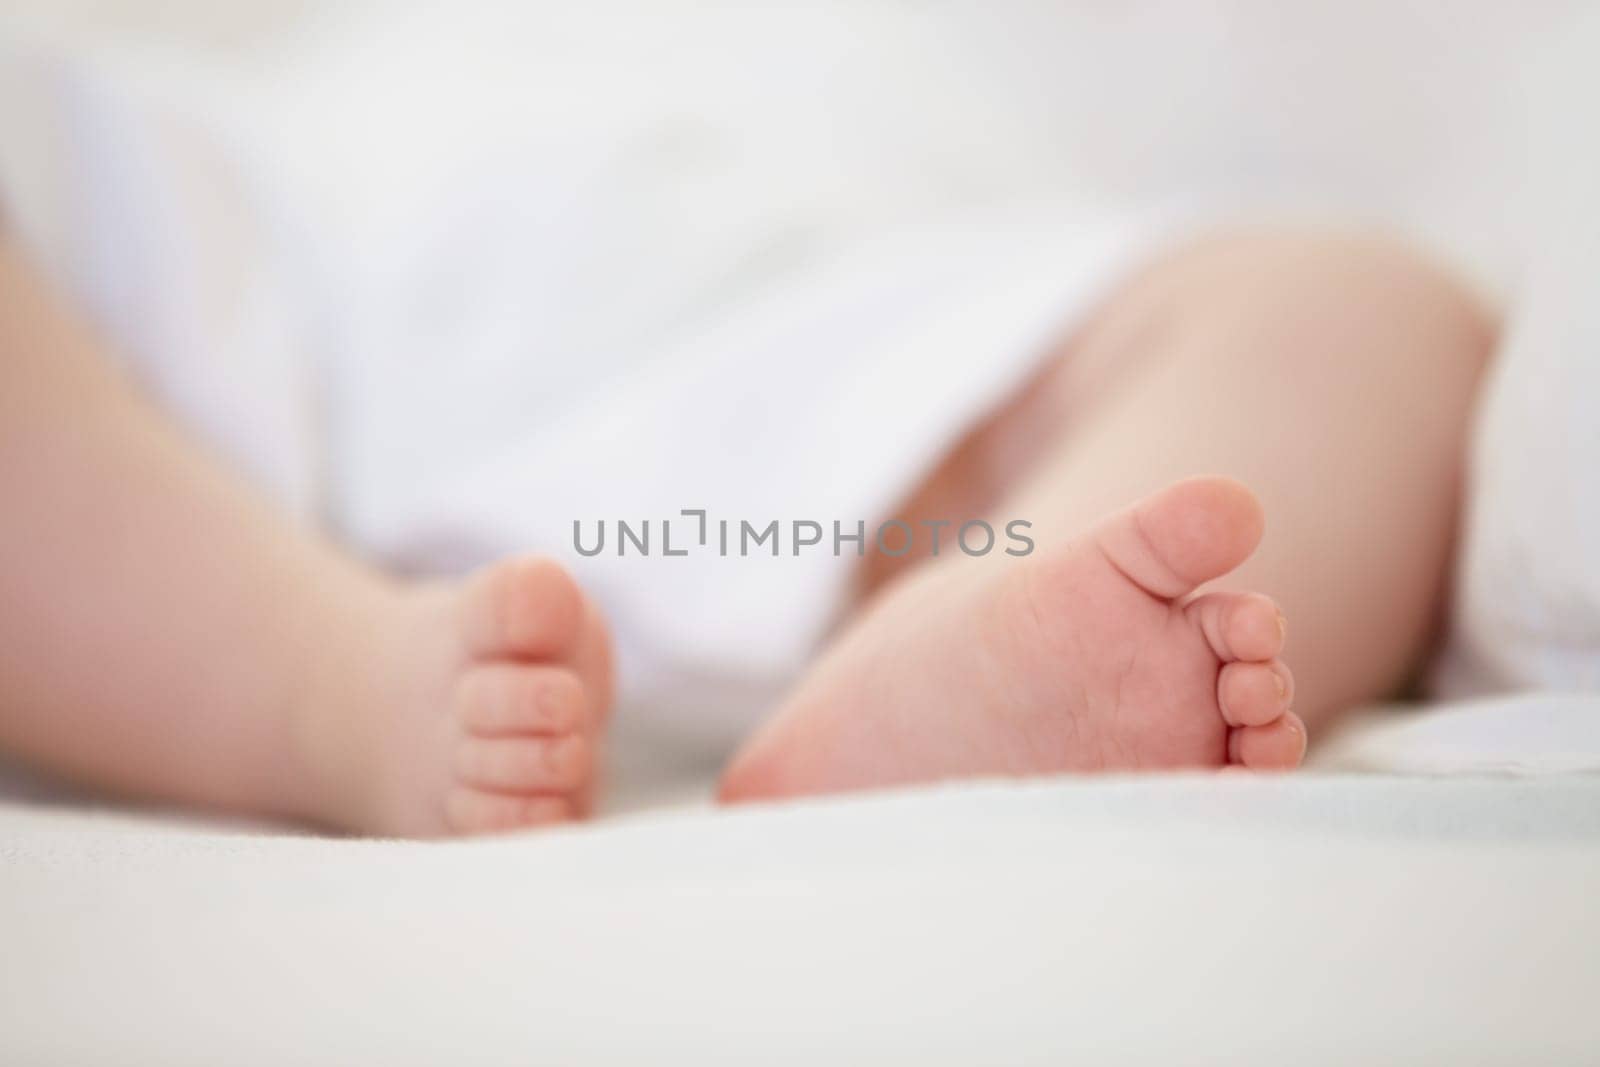 Sleeping, bed and feet of baby in home for dreaming, resting and nap for child development. Family, nursery and closeup of toes of newborn infant in bedroom relax for wellness, health and growth.